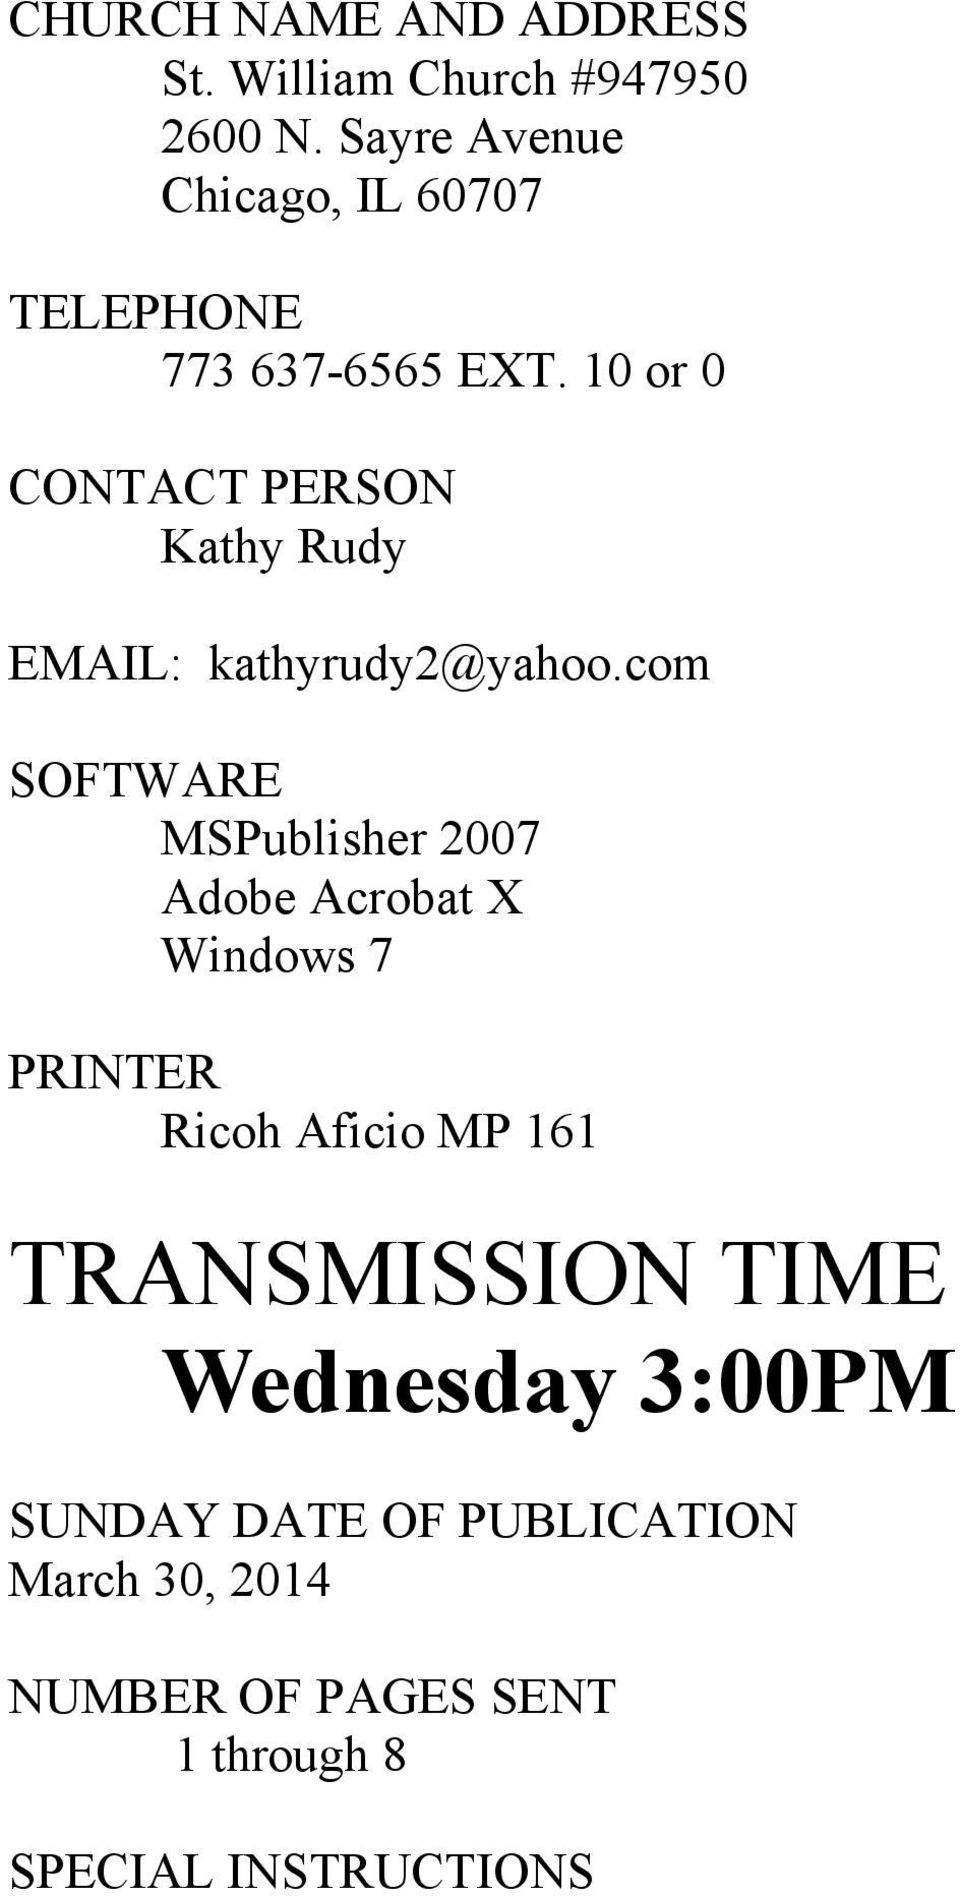 10 or 0 CONTACT PERSON Kathy Rudy EMAIL: kathyrudy2@yahoo.